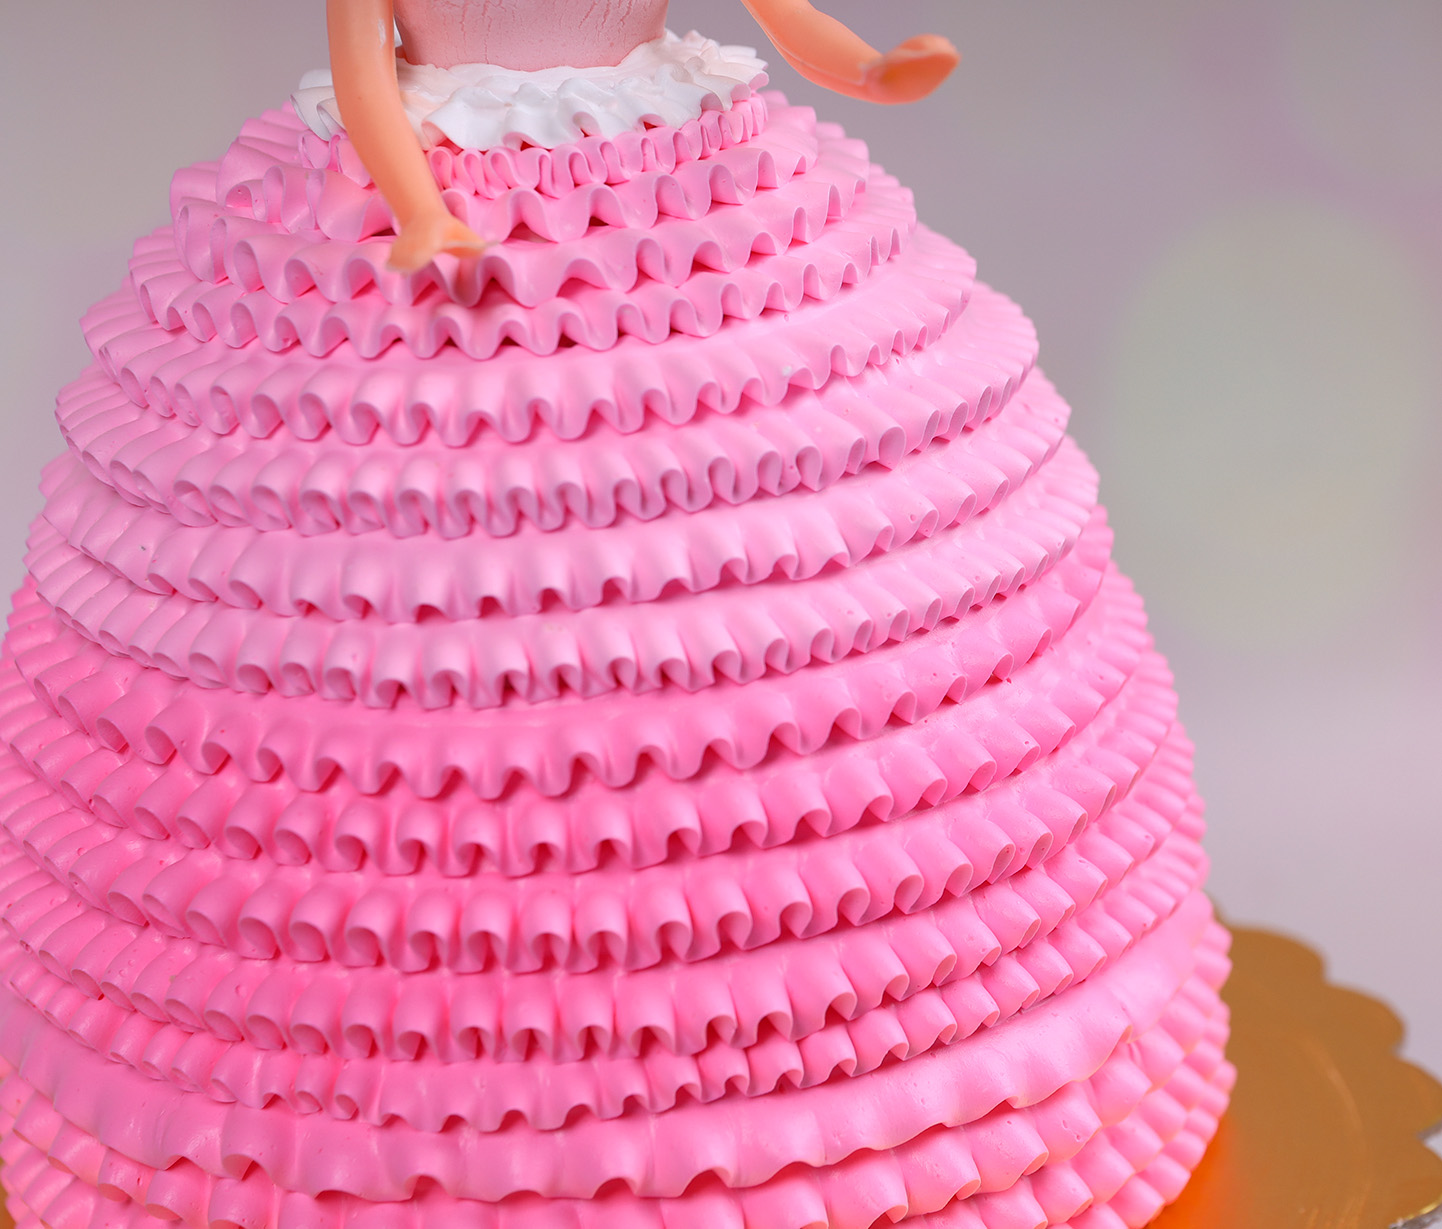 Barbie Cake - Buy Online, Free Next Day UK Delivery — New Cakes